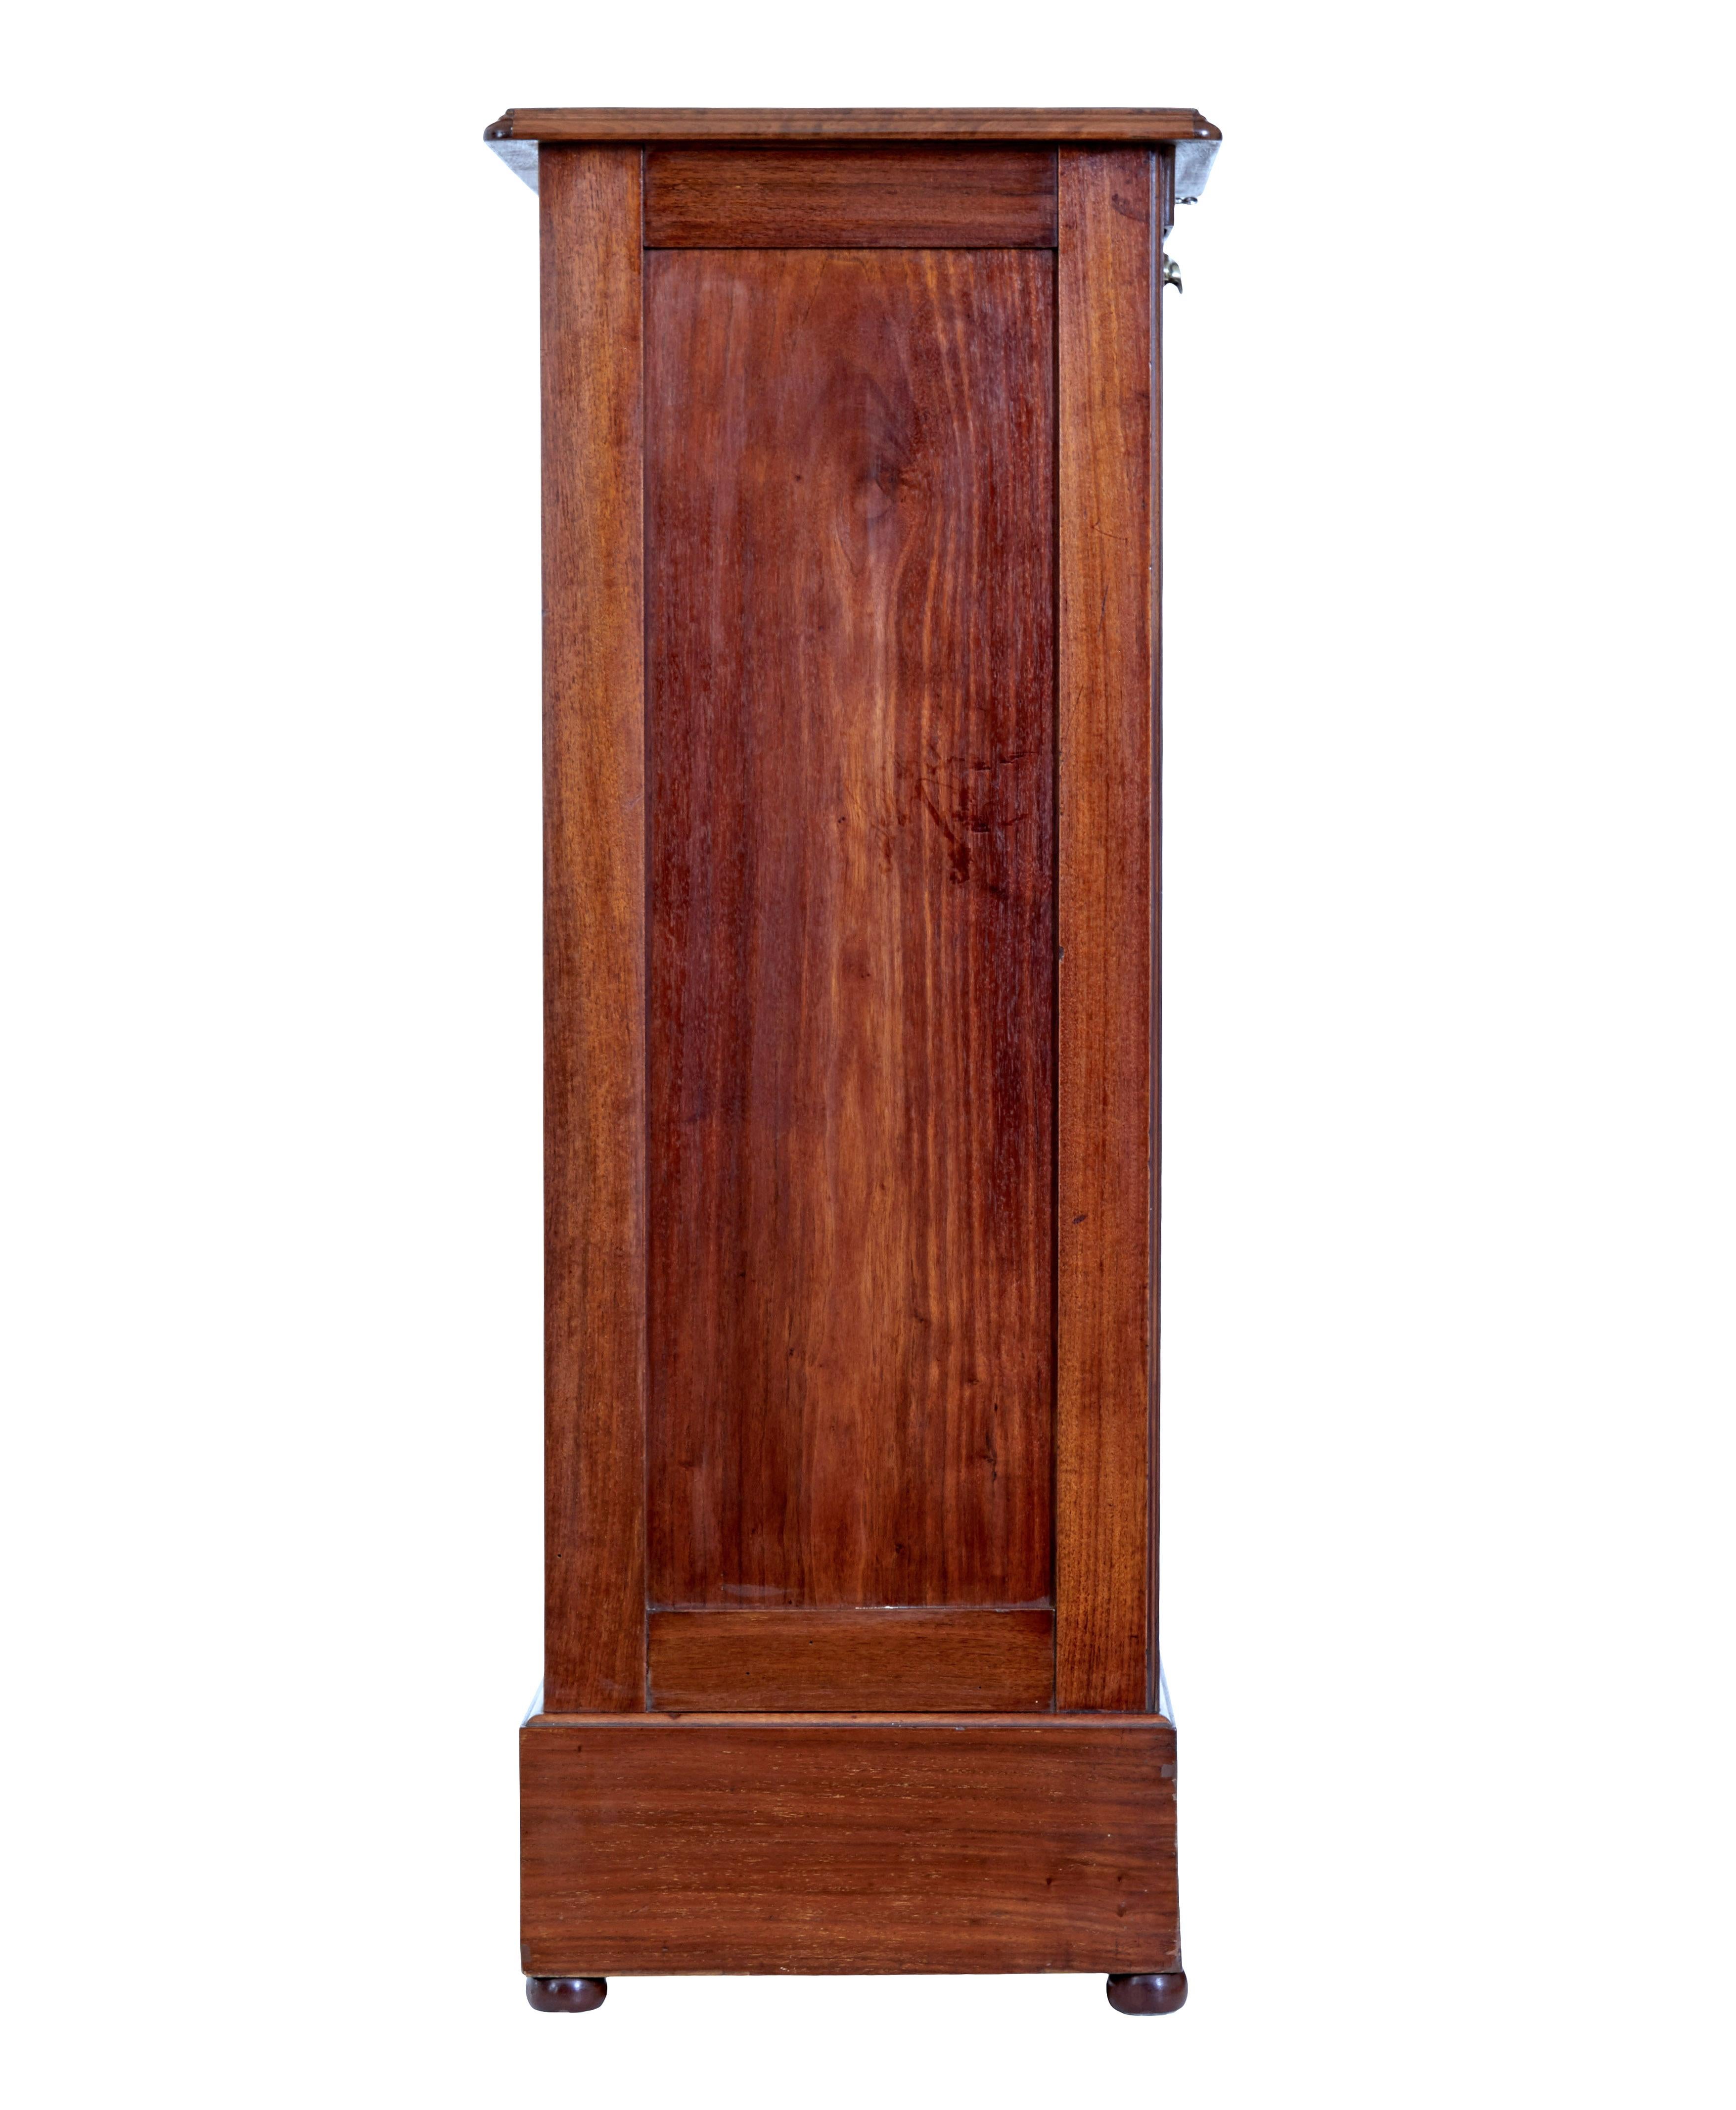 Hand-Carved Early 20th century walnut tambour cabinet